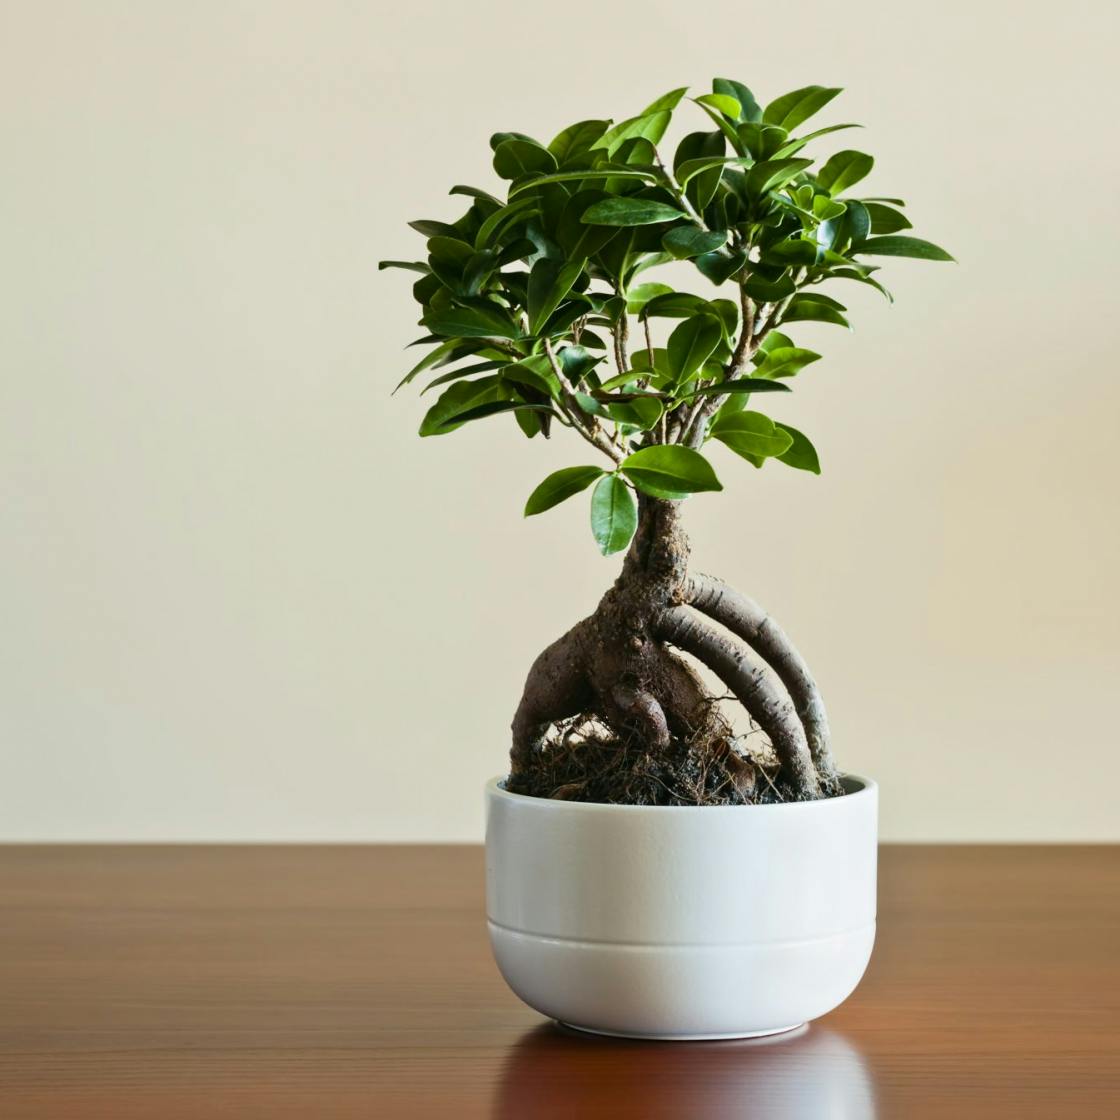 Bonsai tree care a beginners guide to looking after a new plant